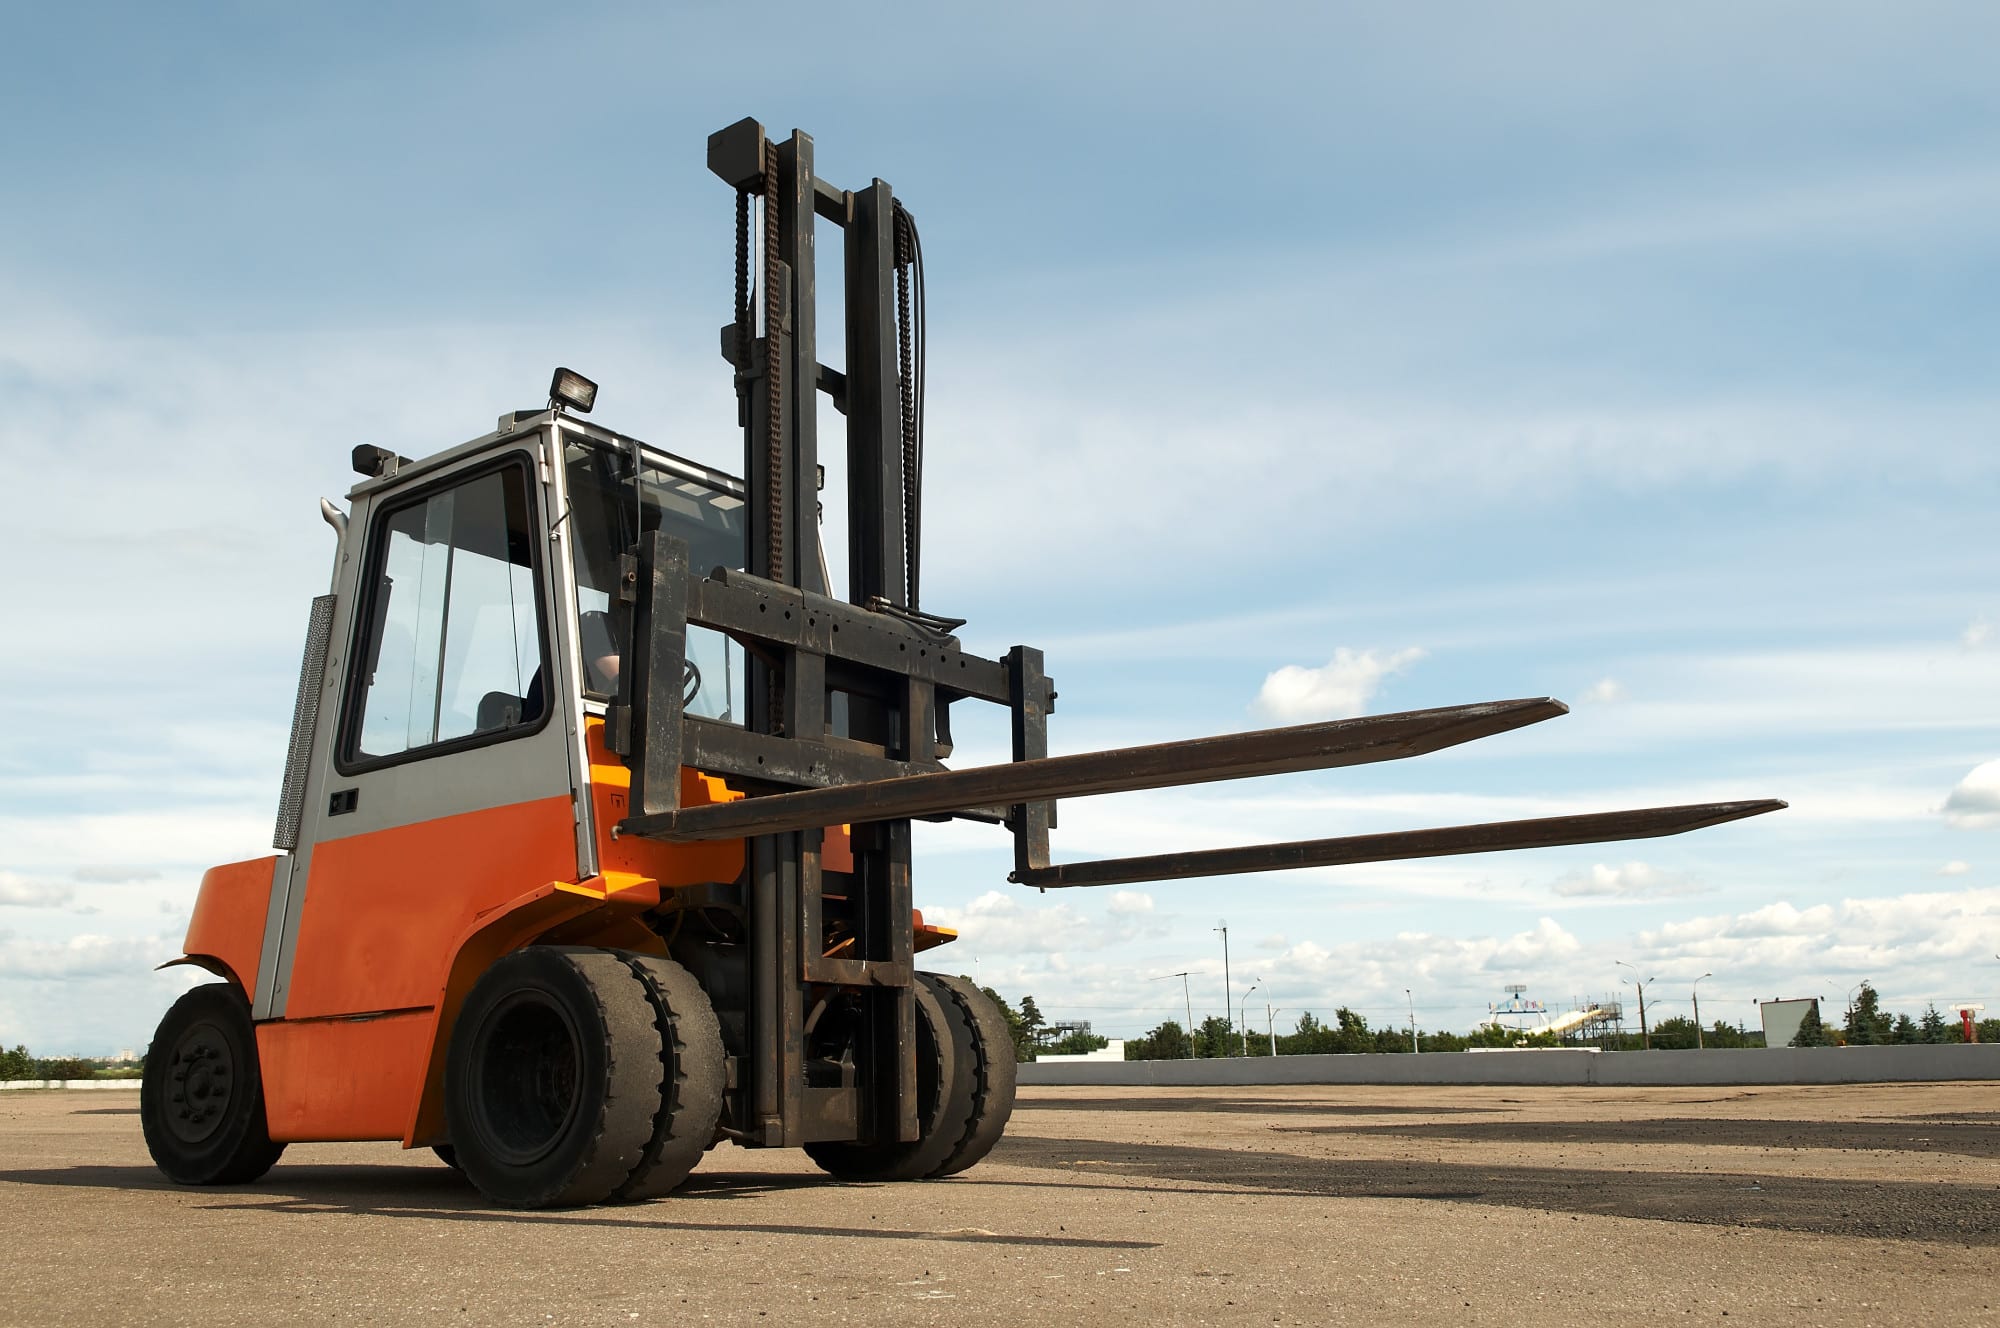 Forklift on a runway